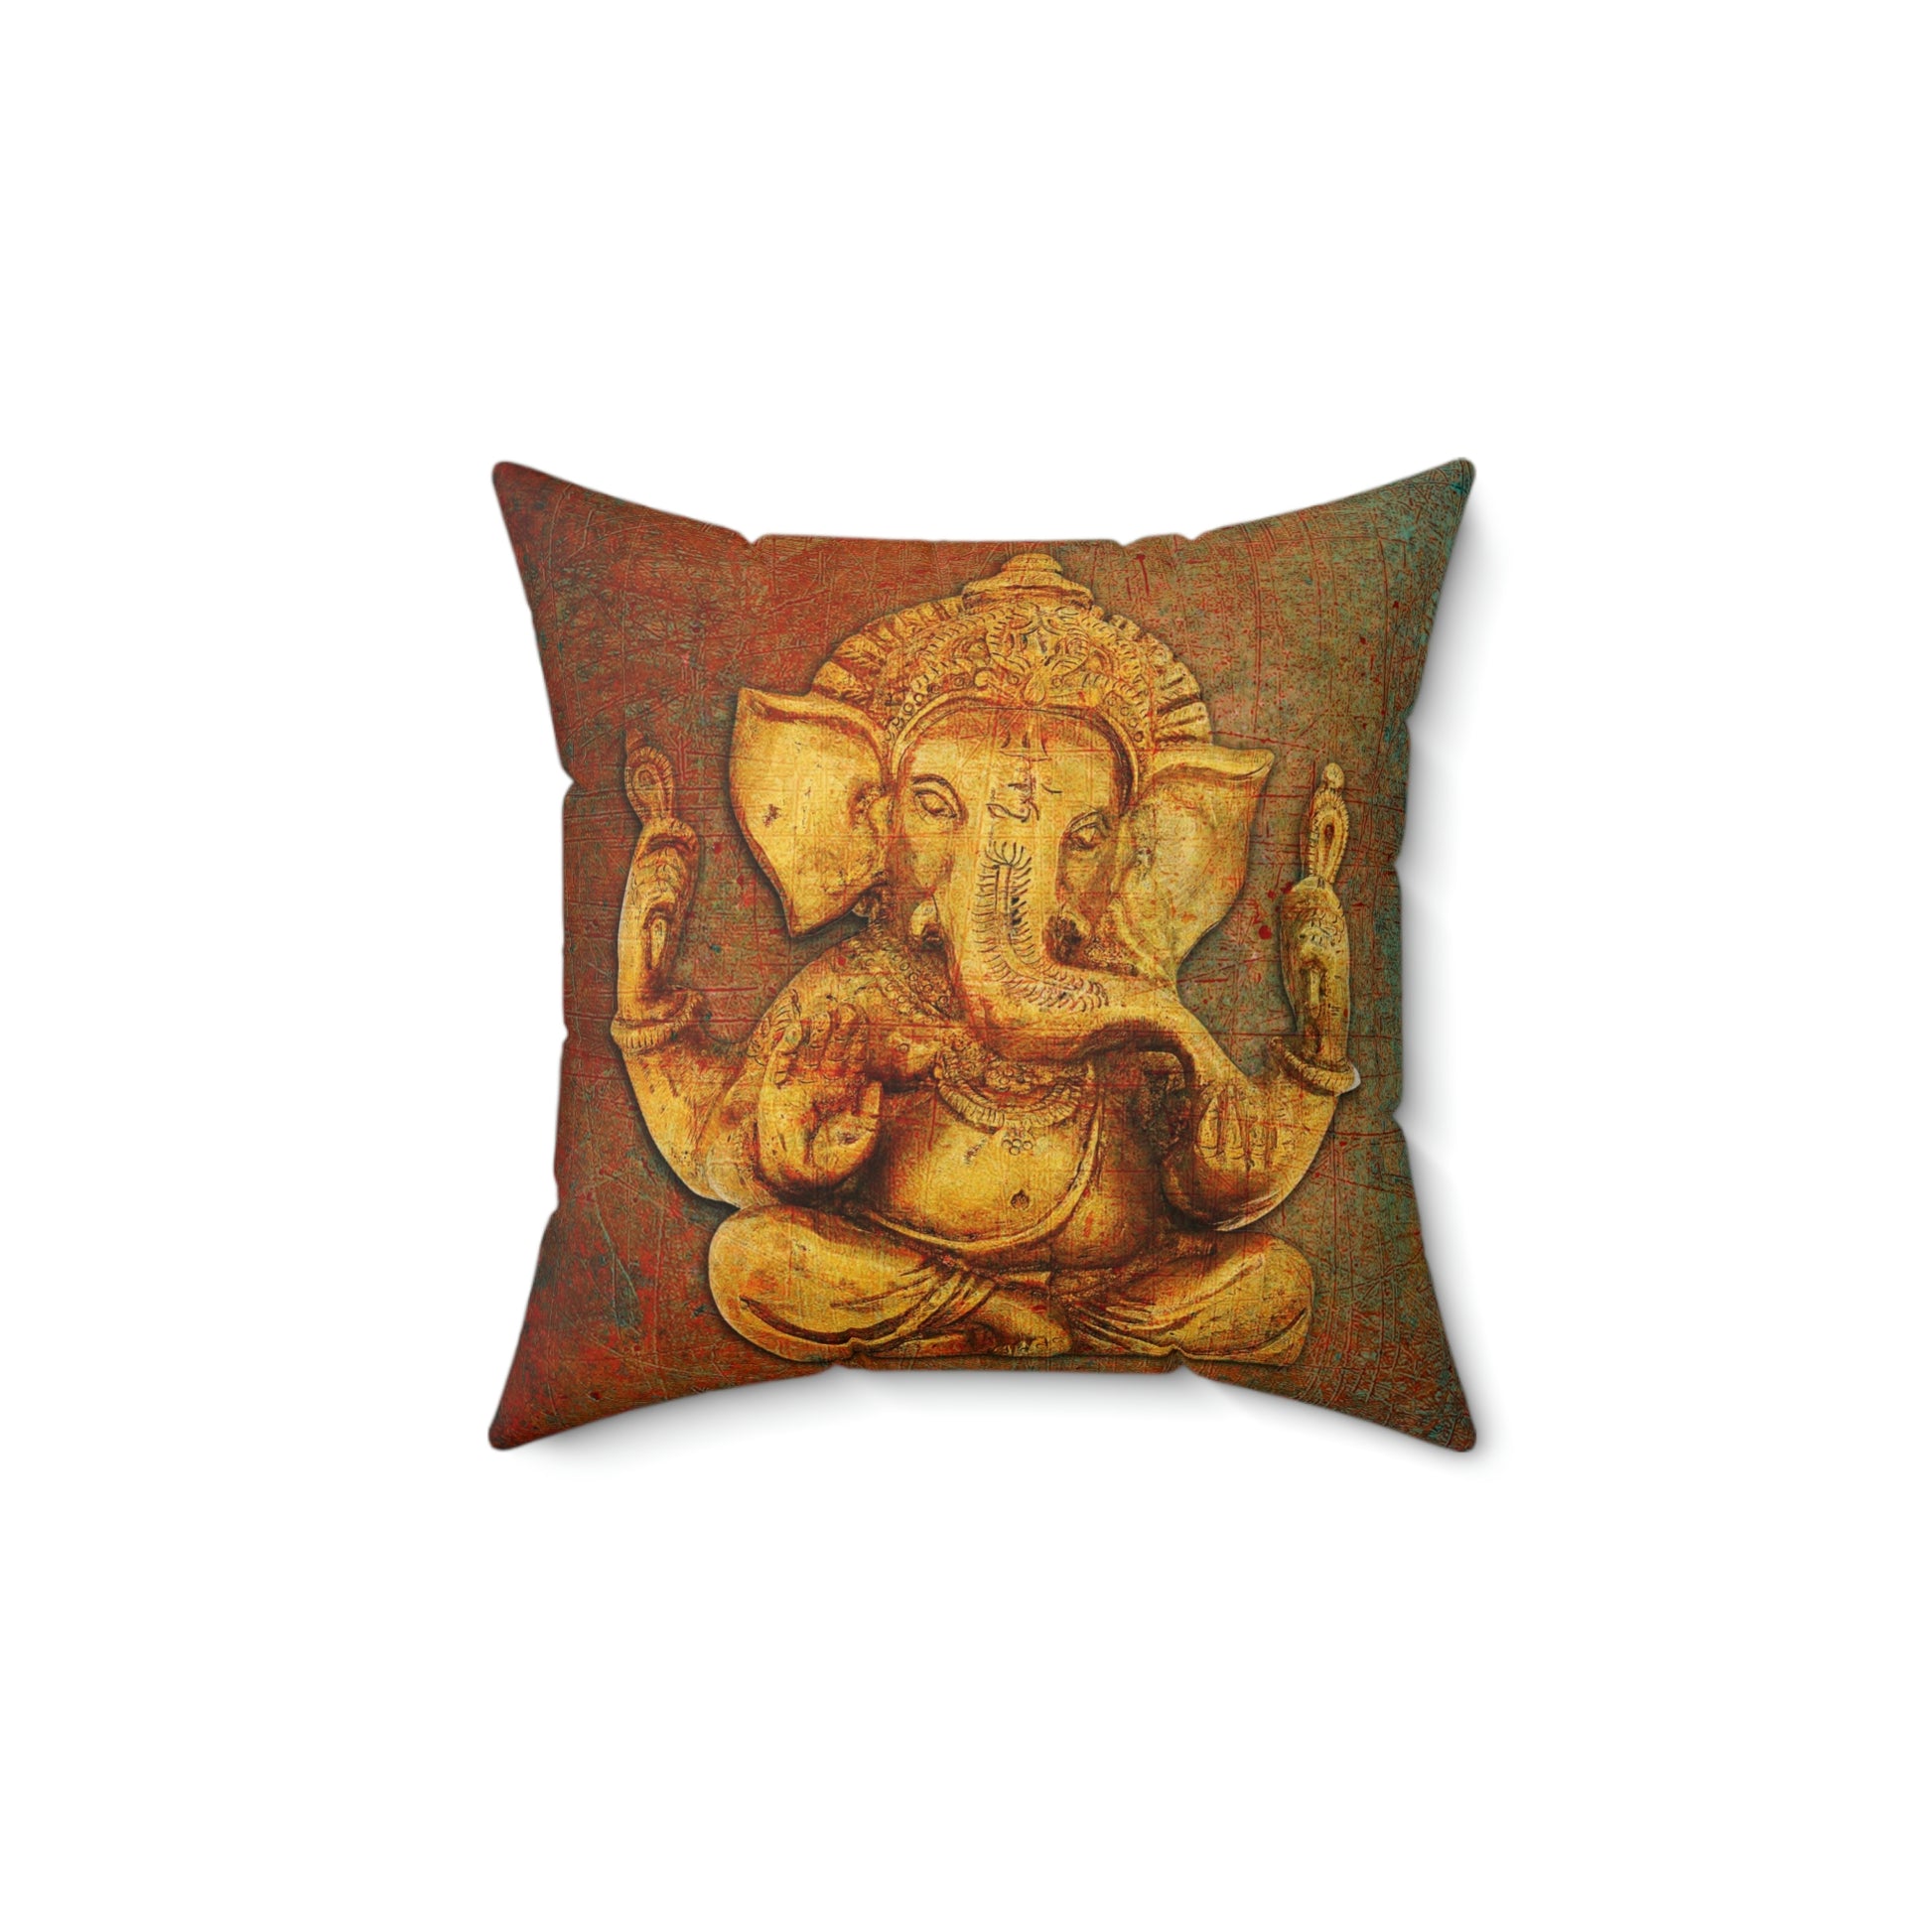 Hindu Goddess Ganesha on a distressed background front view